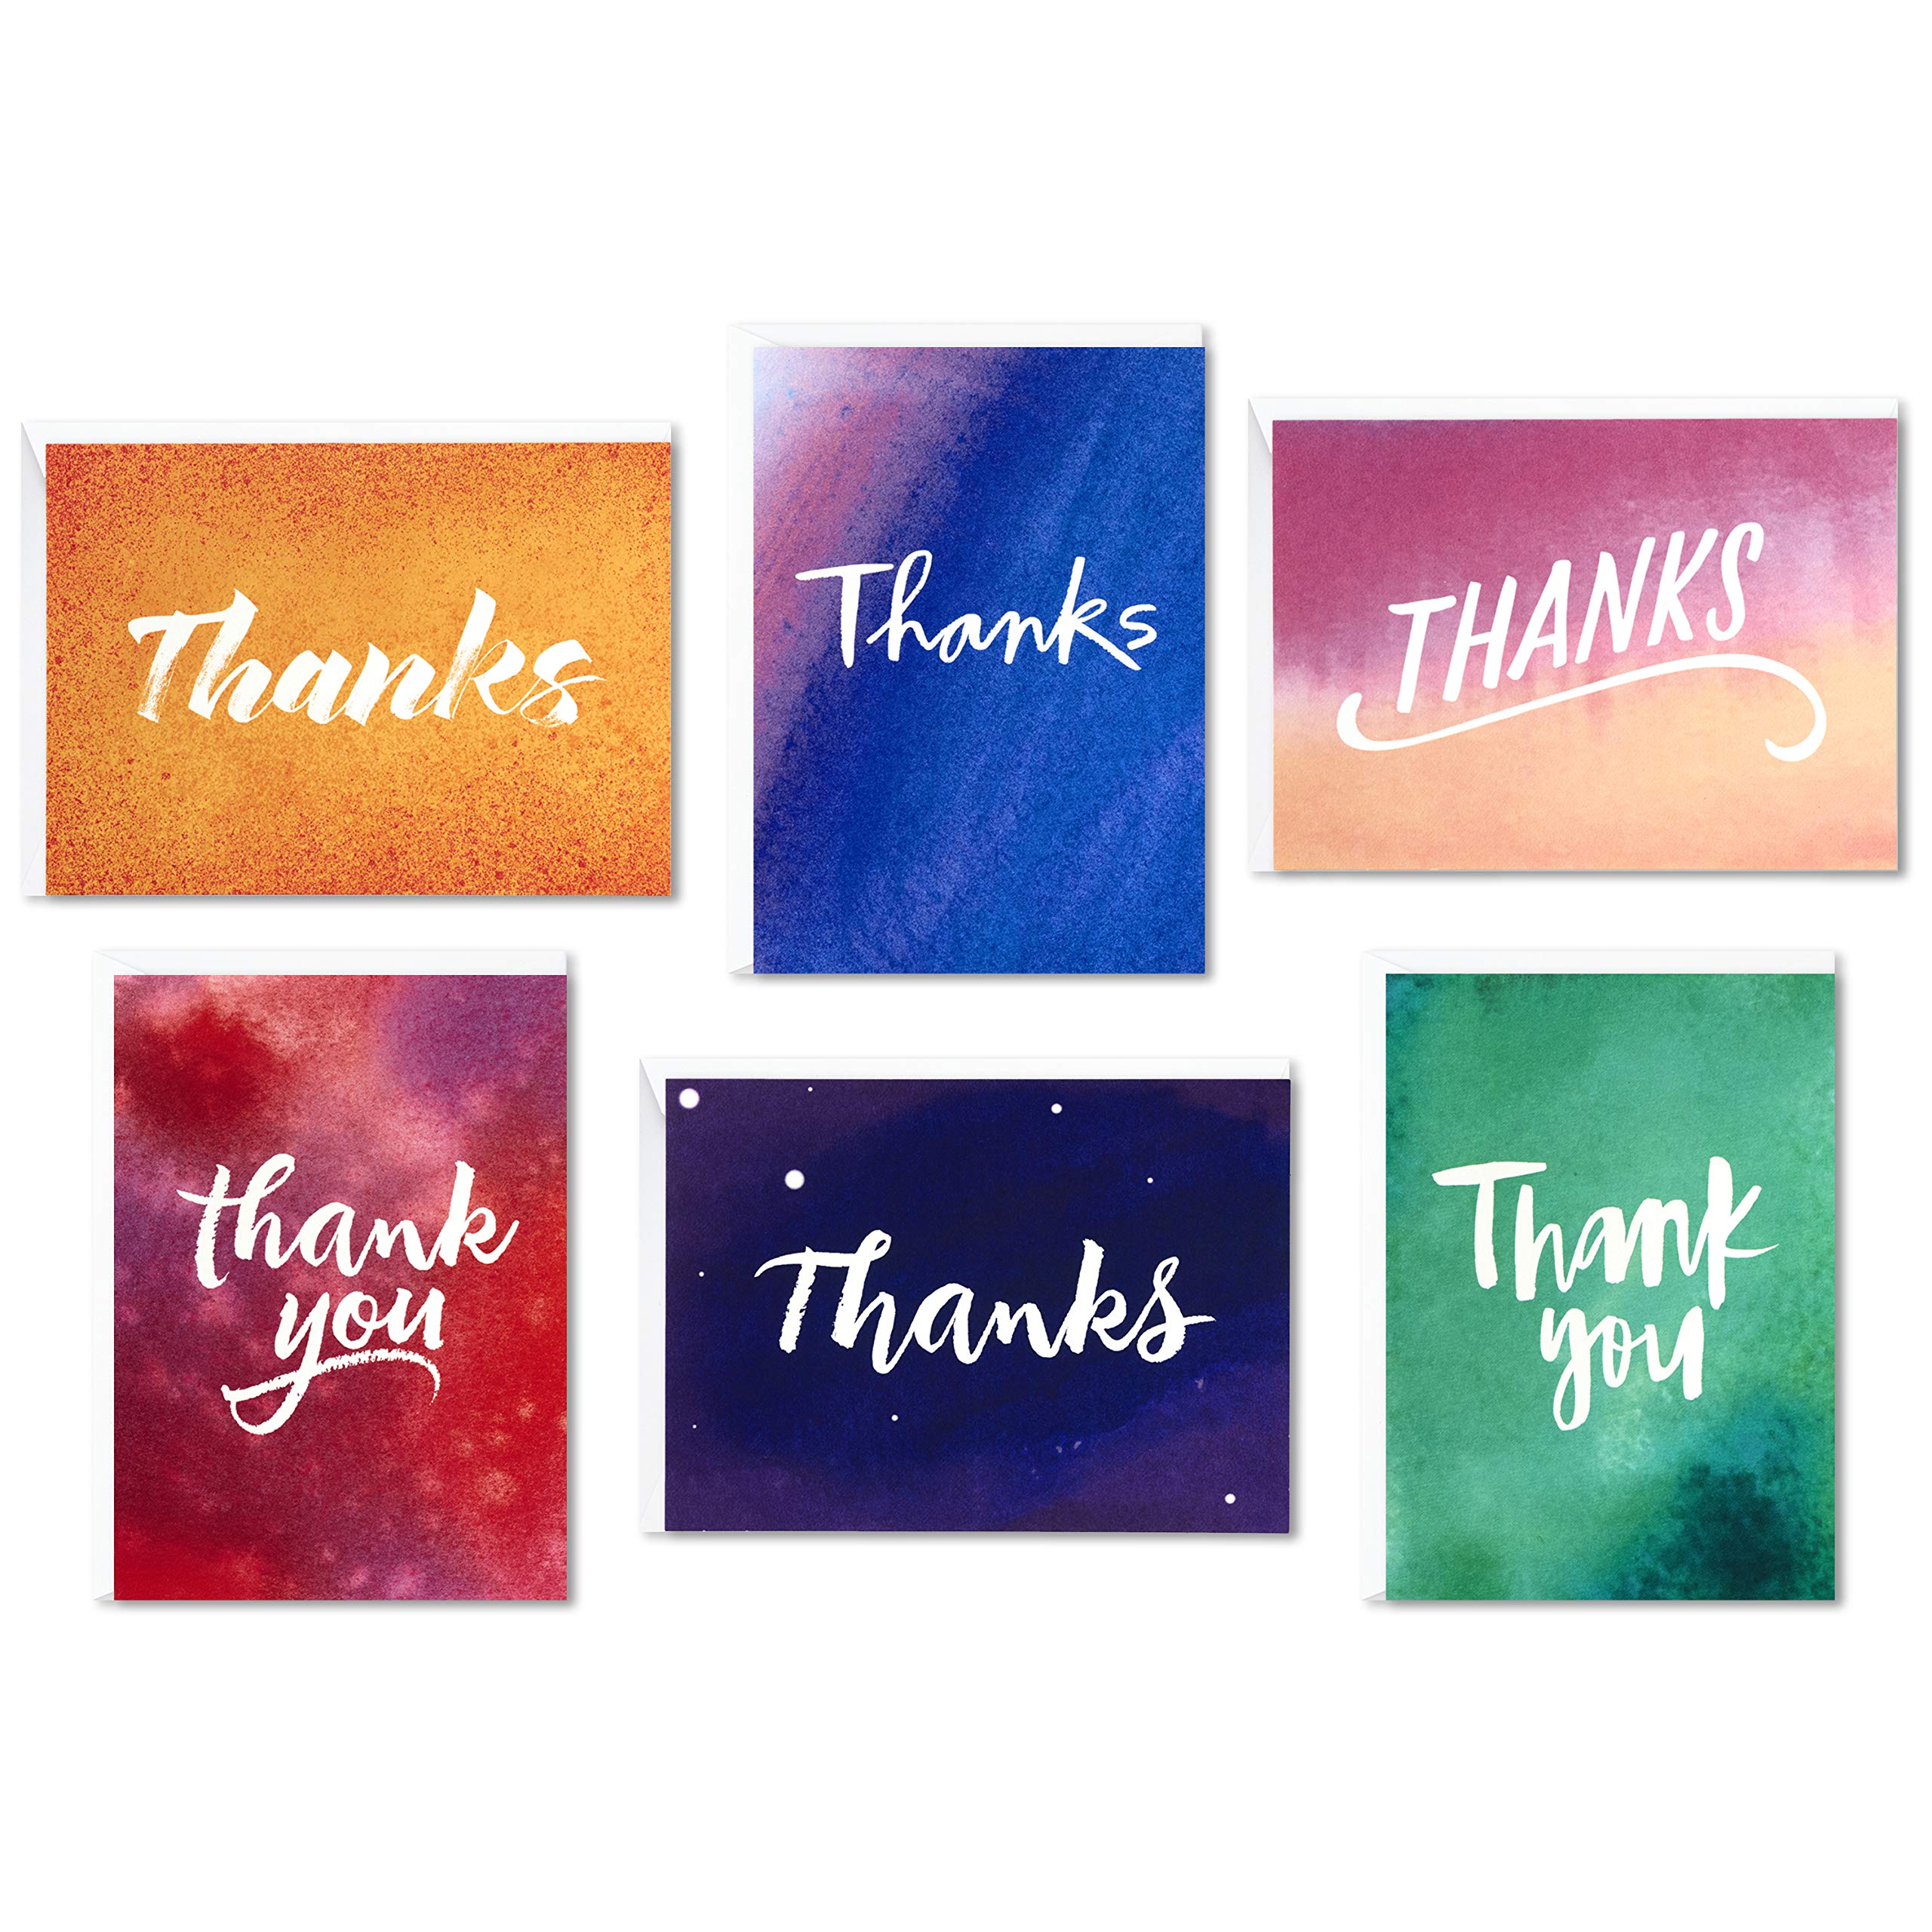 Hallmark Thank You Cards Assortment, Watercolor Thanks (48 Cards with Envelopes for Baby Showers, Wedding, Bridal Showers, All Occasion)